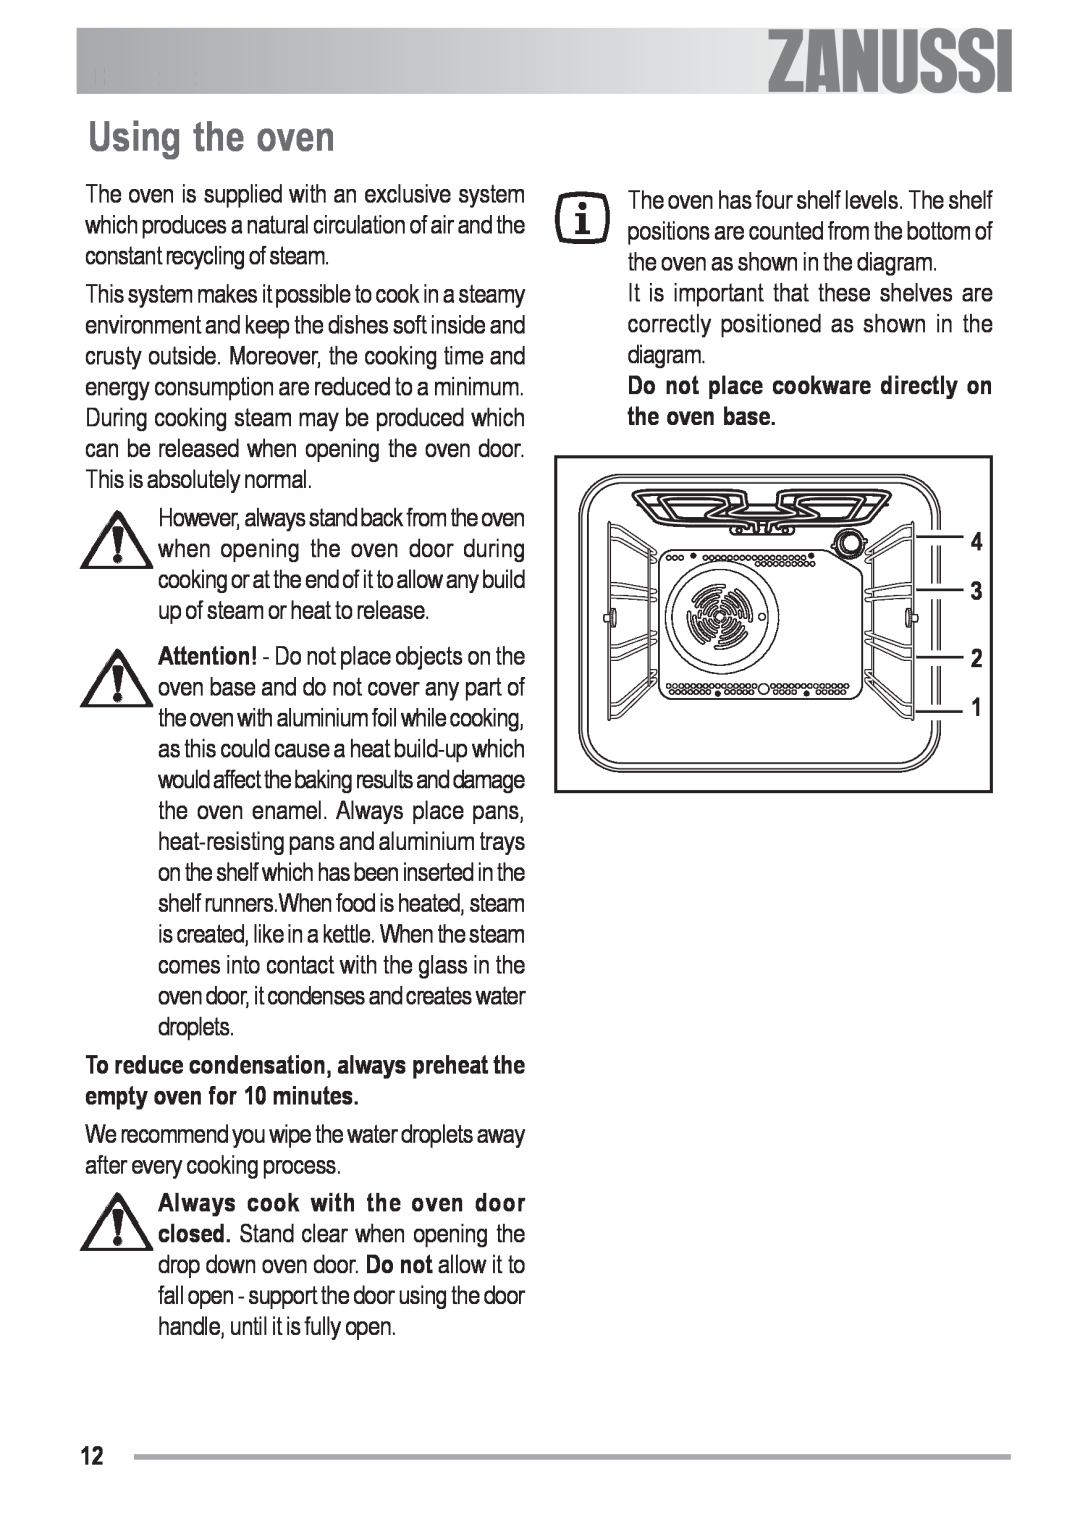 Zanussi ZOB 691 manual Using the oven, electrolux, Do not place cookware directly on the oven base 